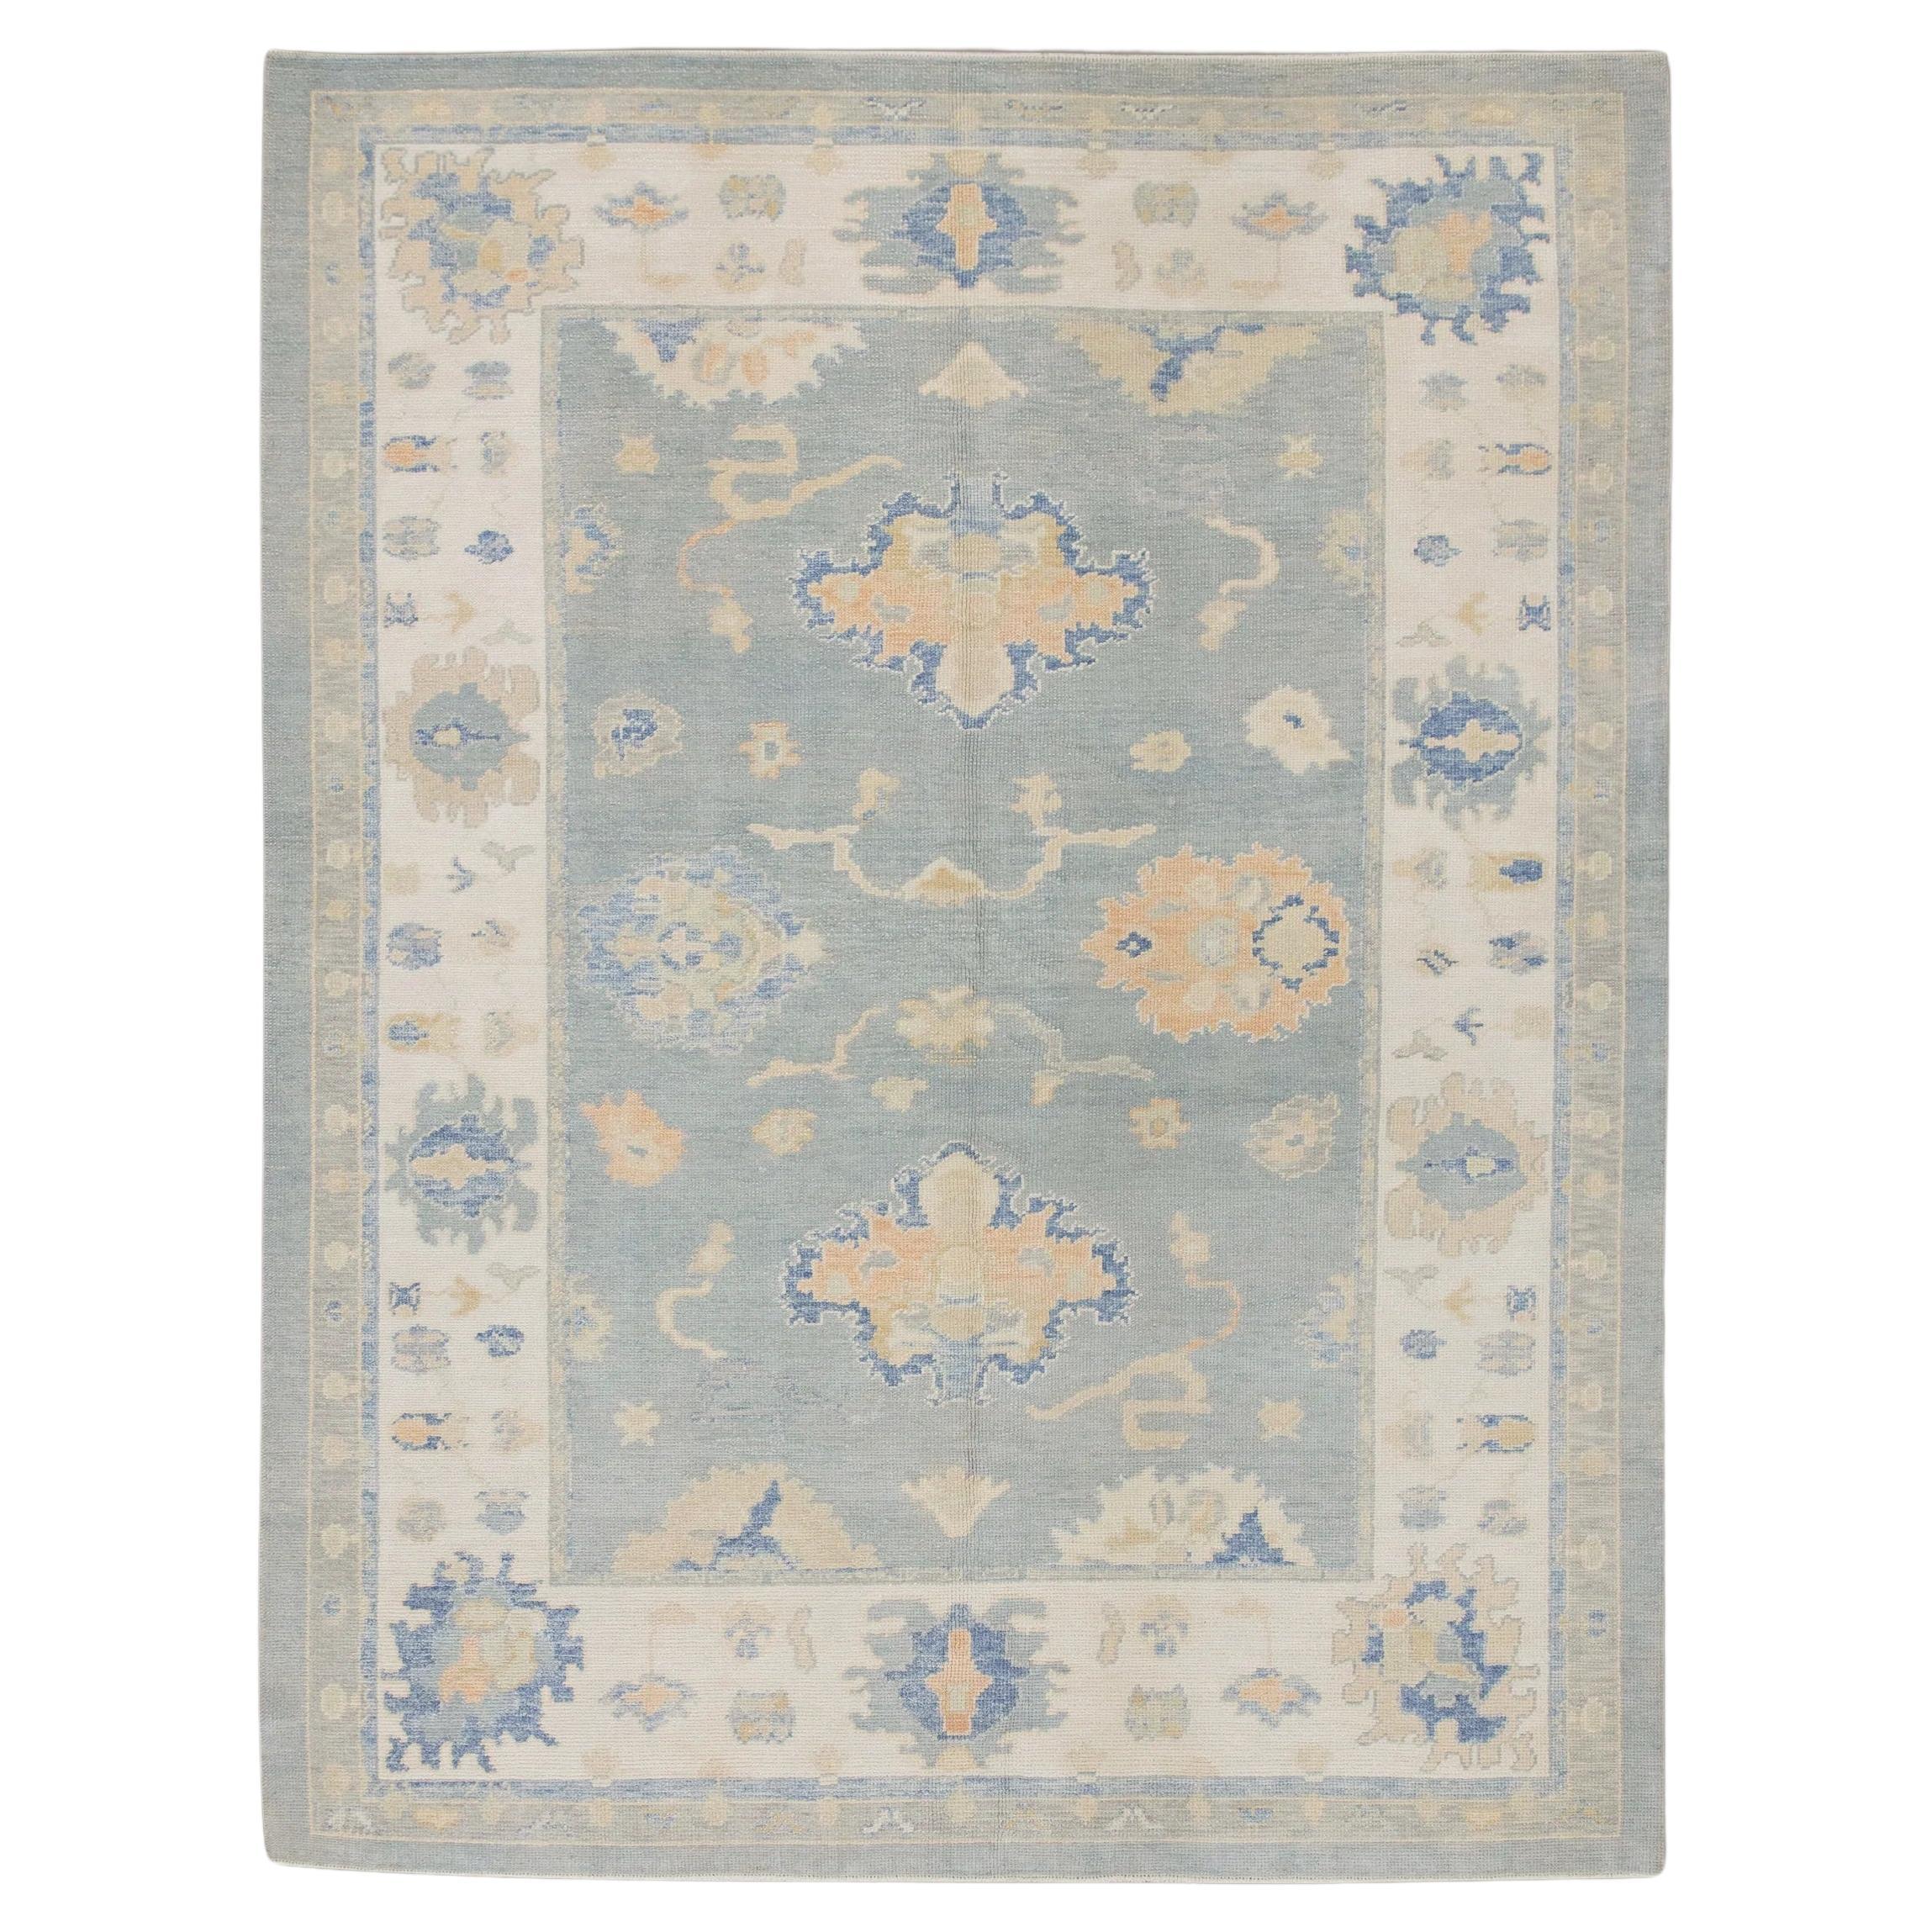 Handwoven Wool Turkish Oushak Rug in Blue & Apricot Floral Design 7' x 9'5"